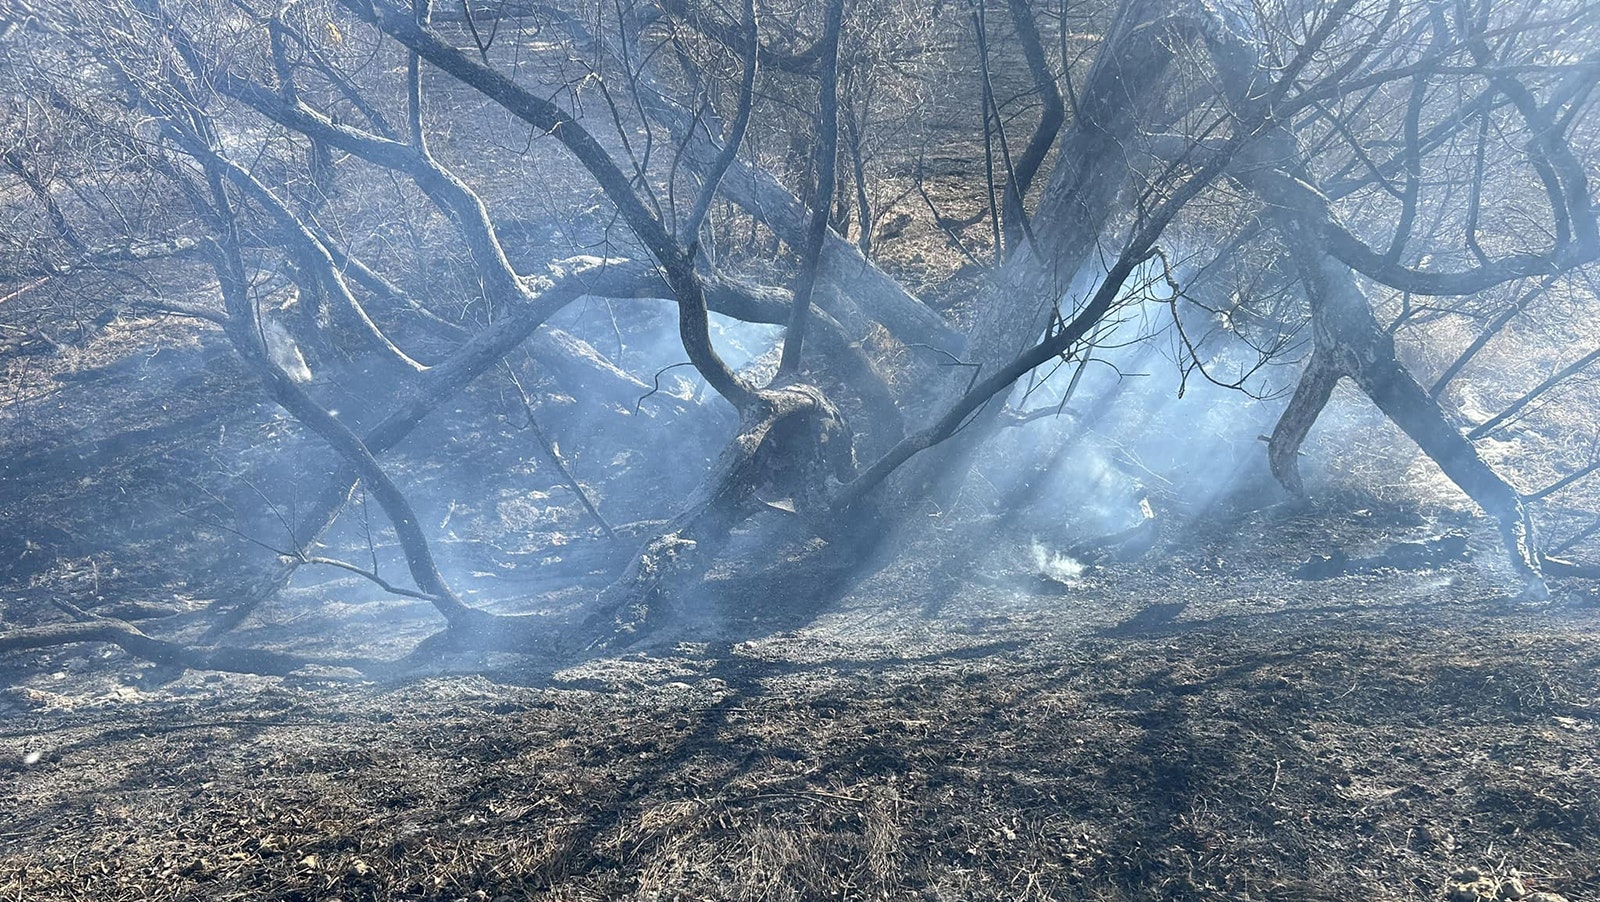 Trees, grass and a few wooden fence posts were burned in the fire.